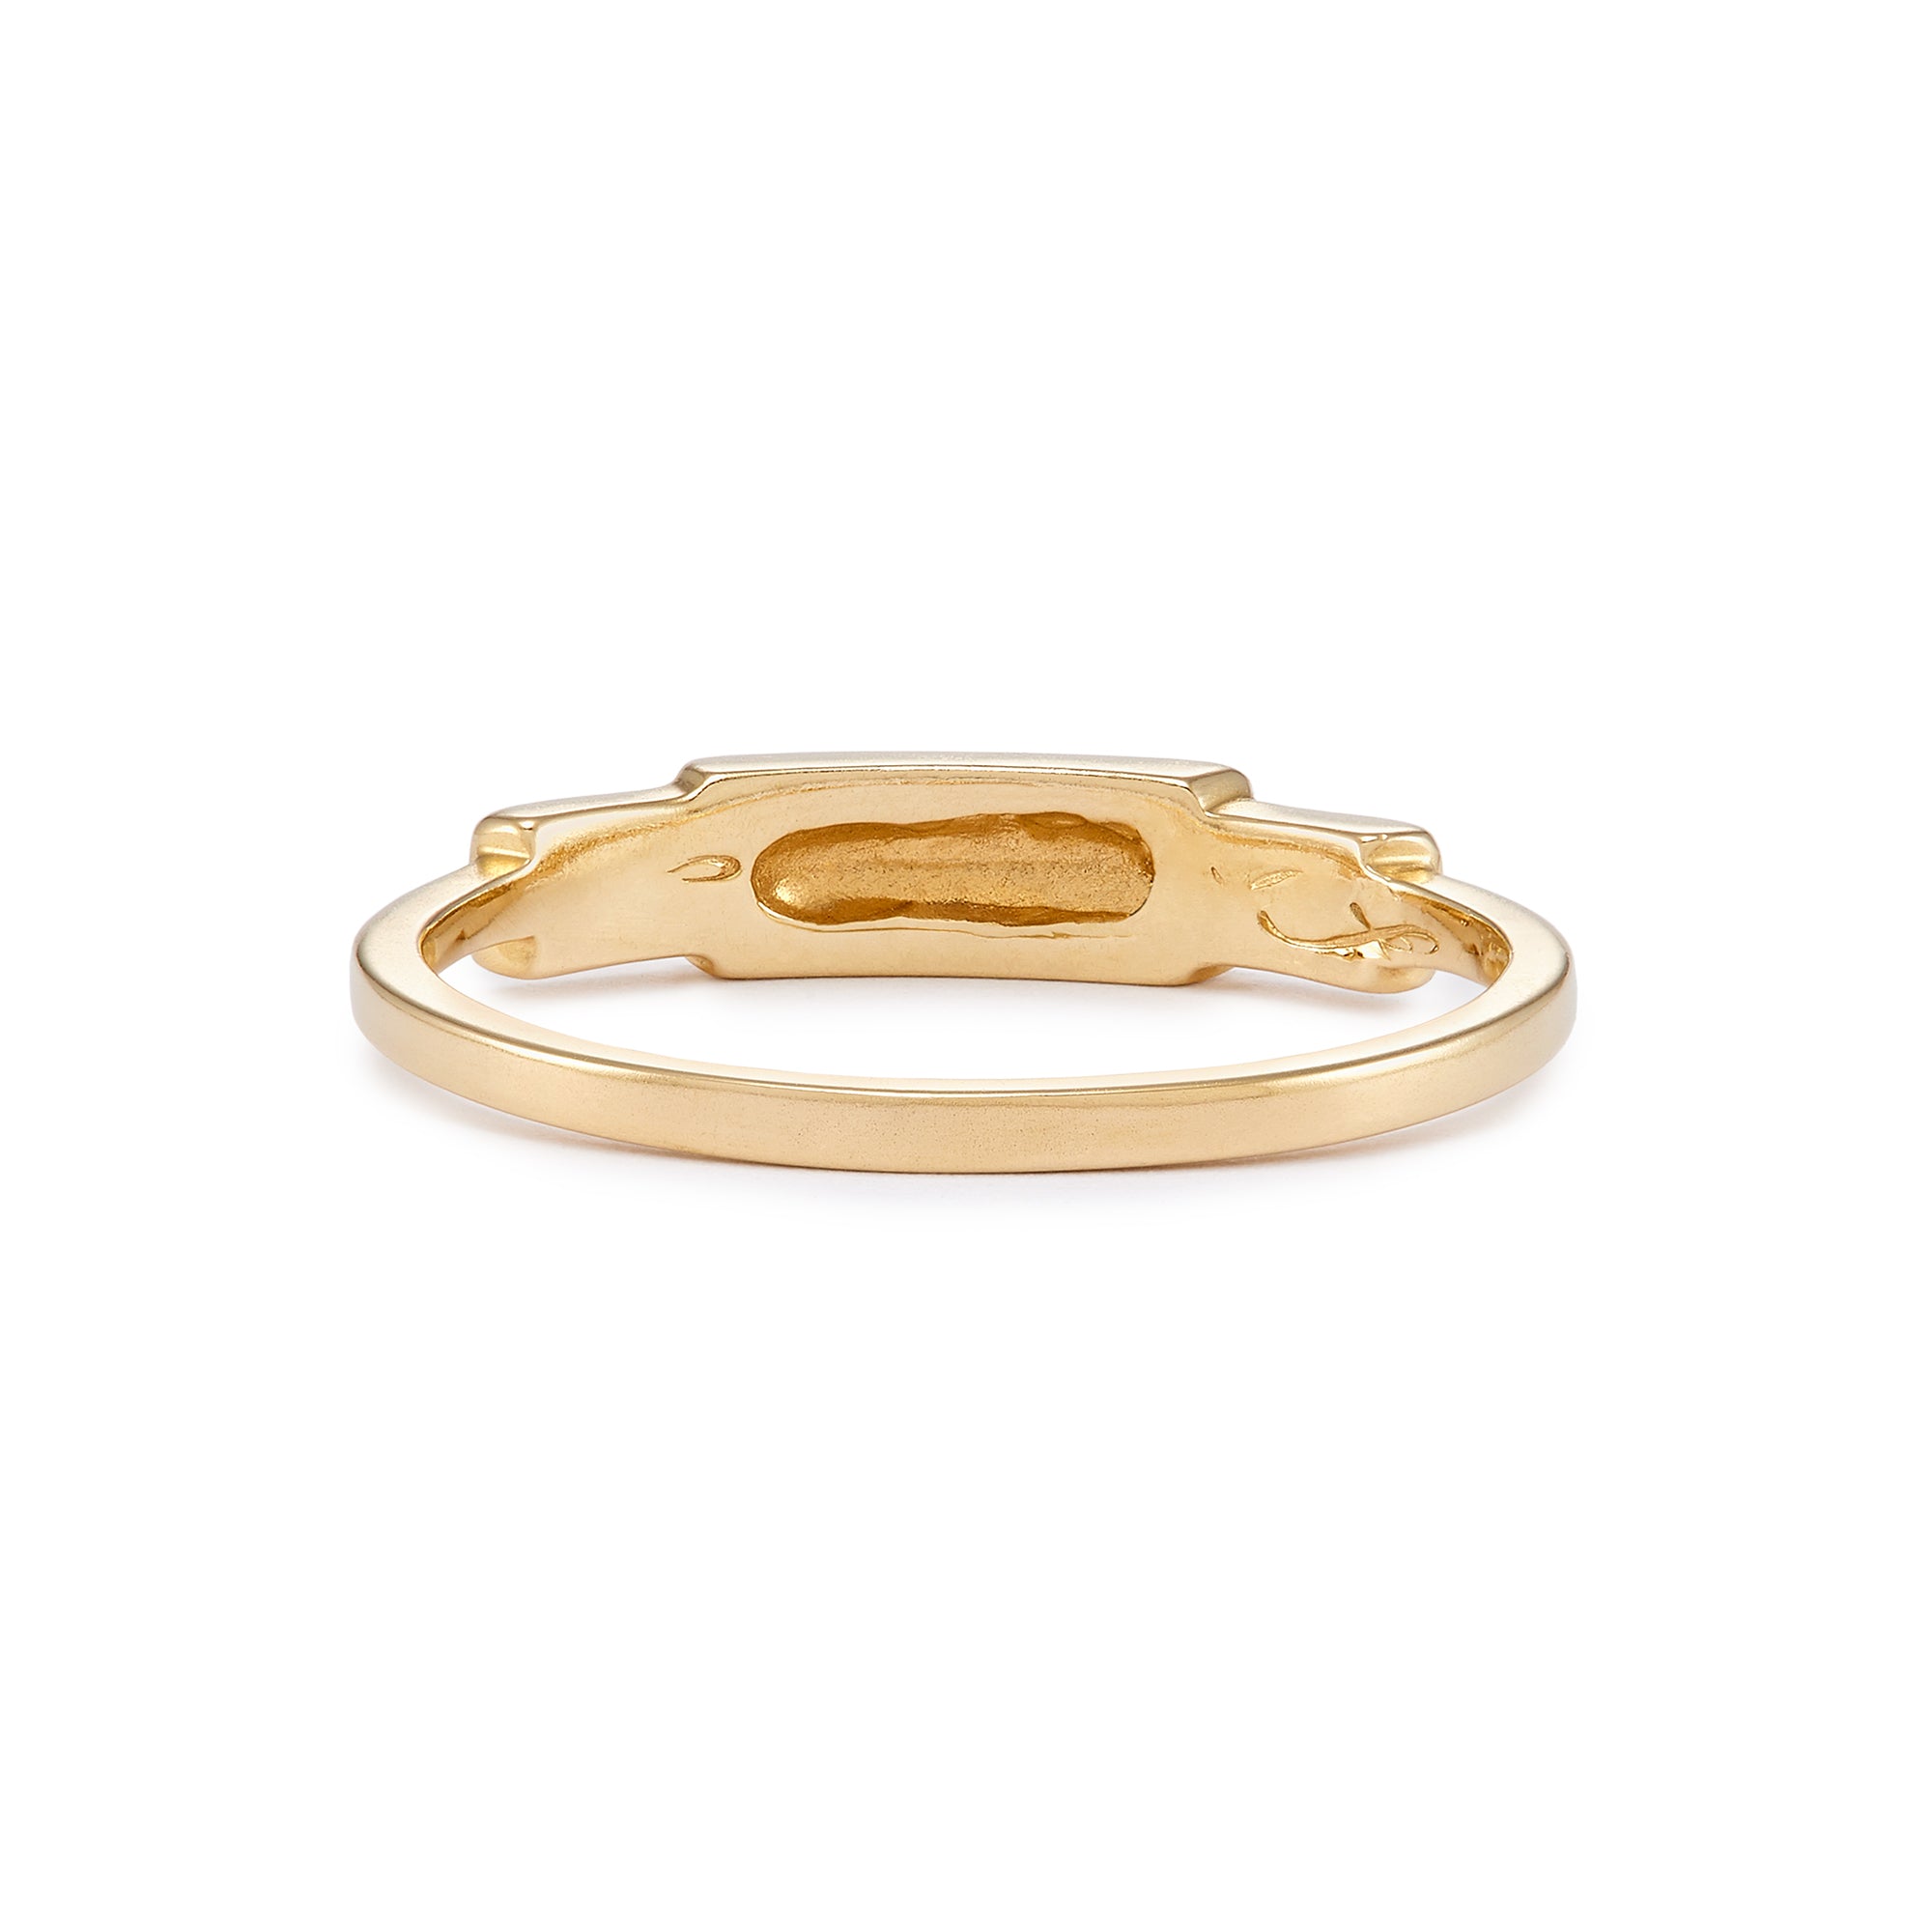 Fresh and modern, the Smooth Stepped Band has a flat brushed finish and a single 0.02 tcw diamond flush set in 14K gold.